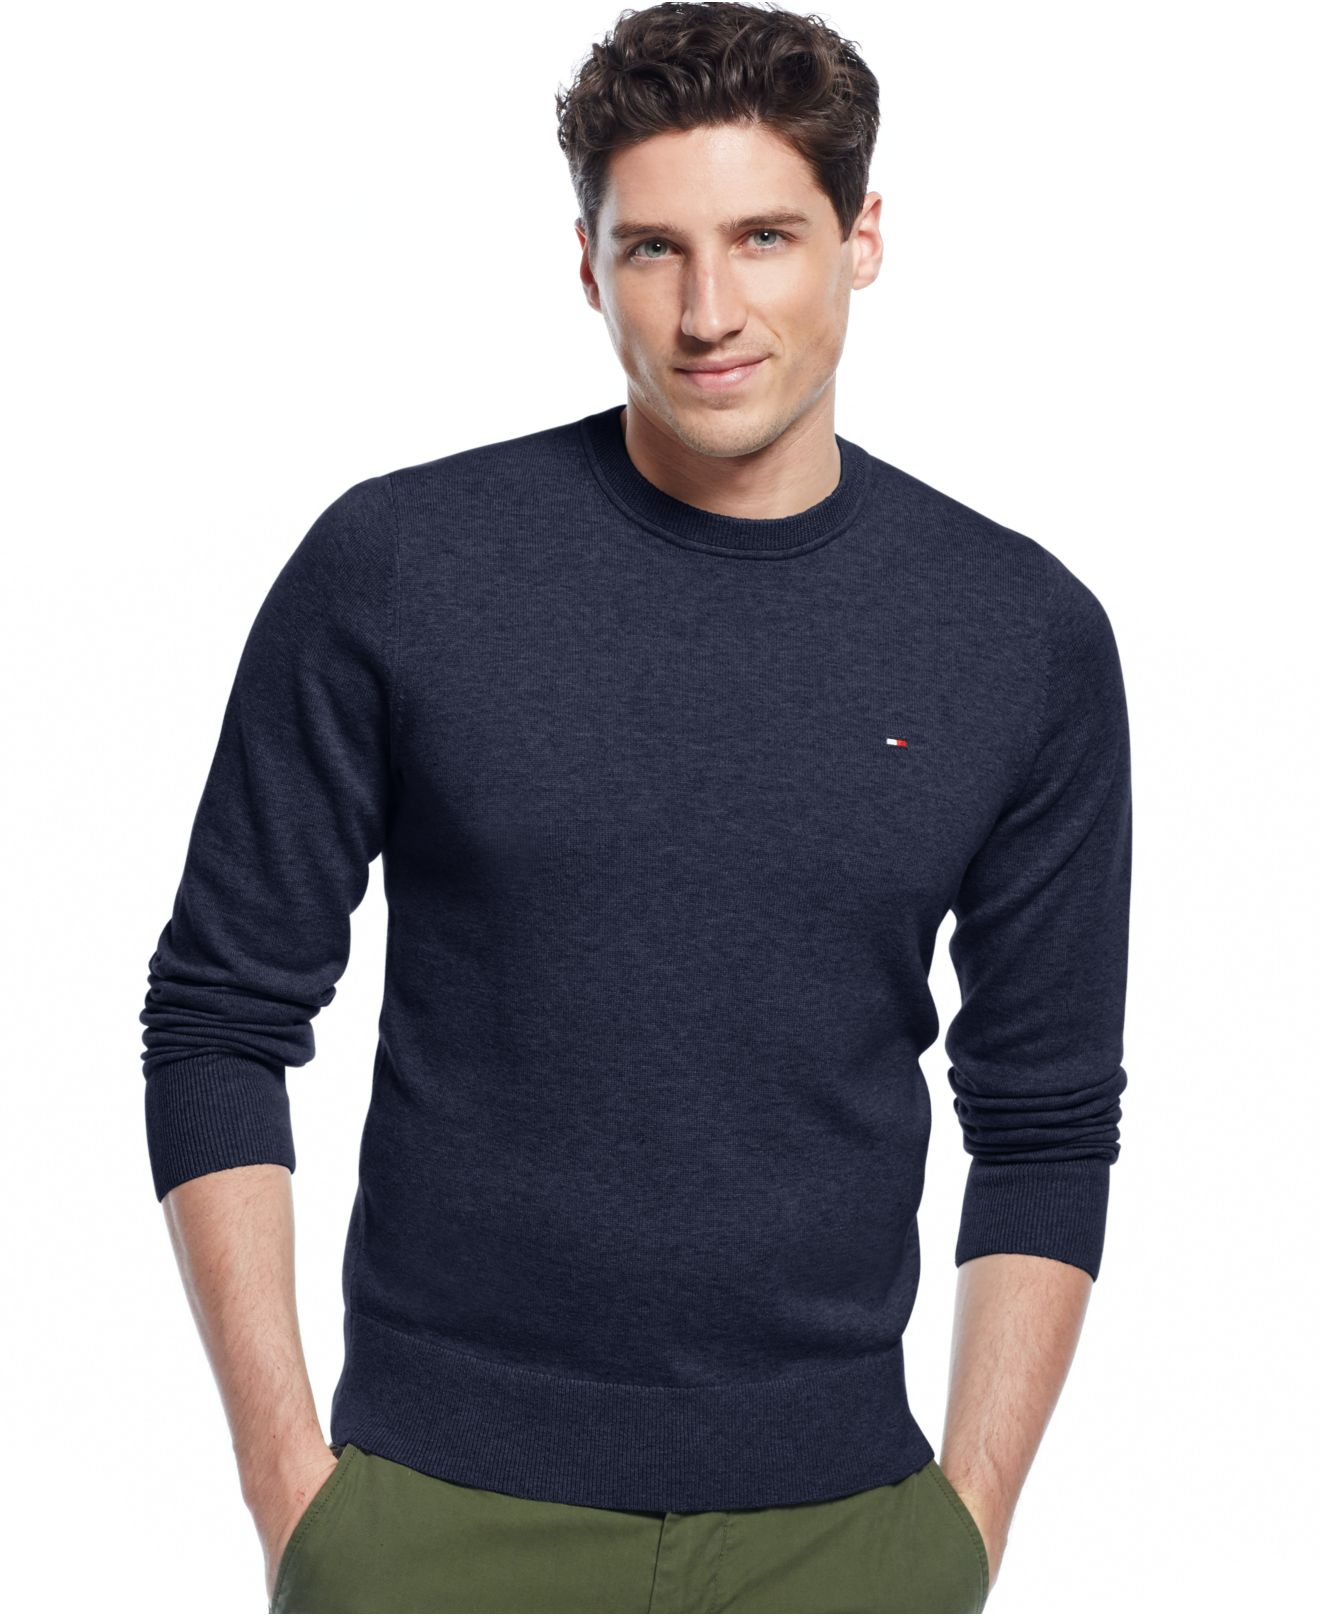 Tommy Signature Crew Neck Sweatshirt on Sale, 51% OFF | www.ngny.tech